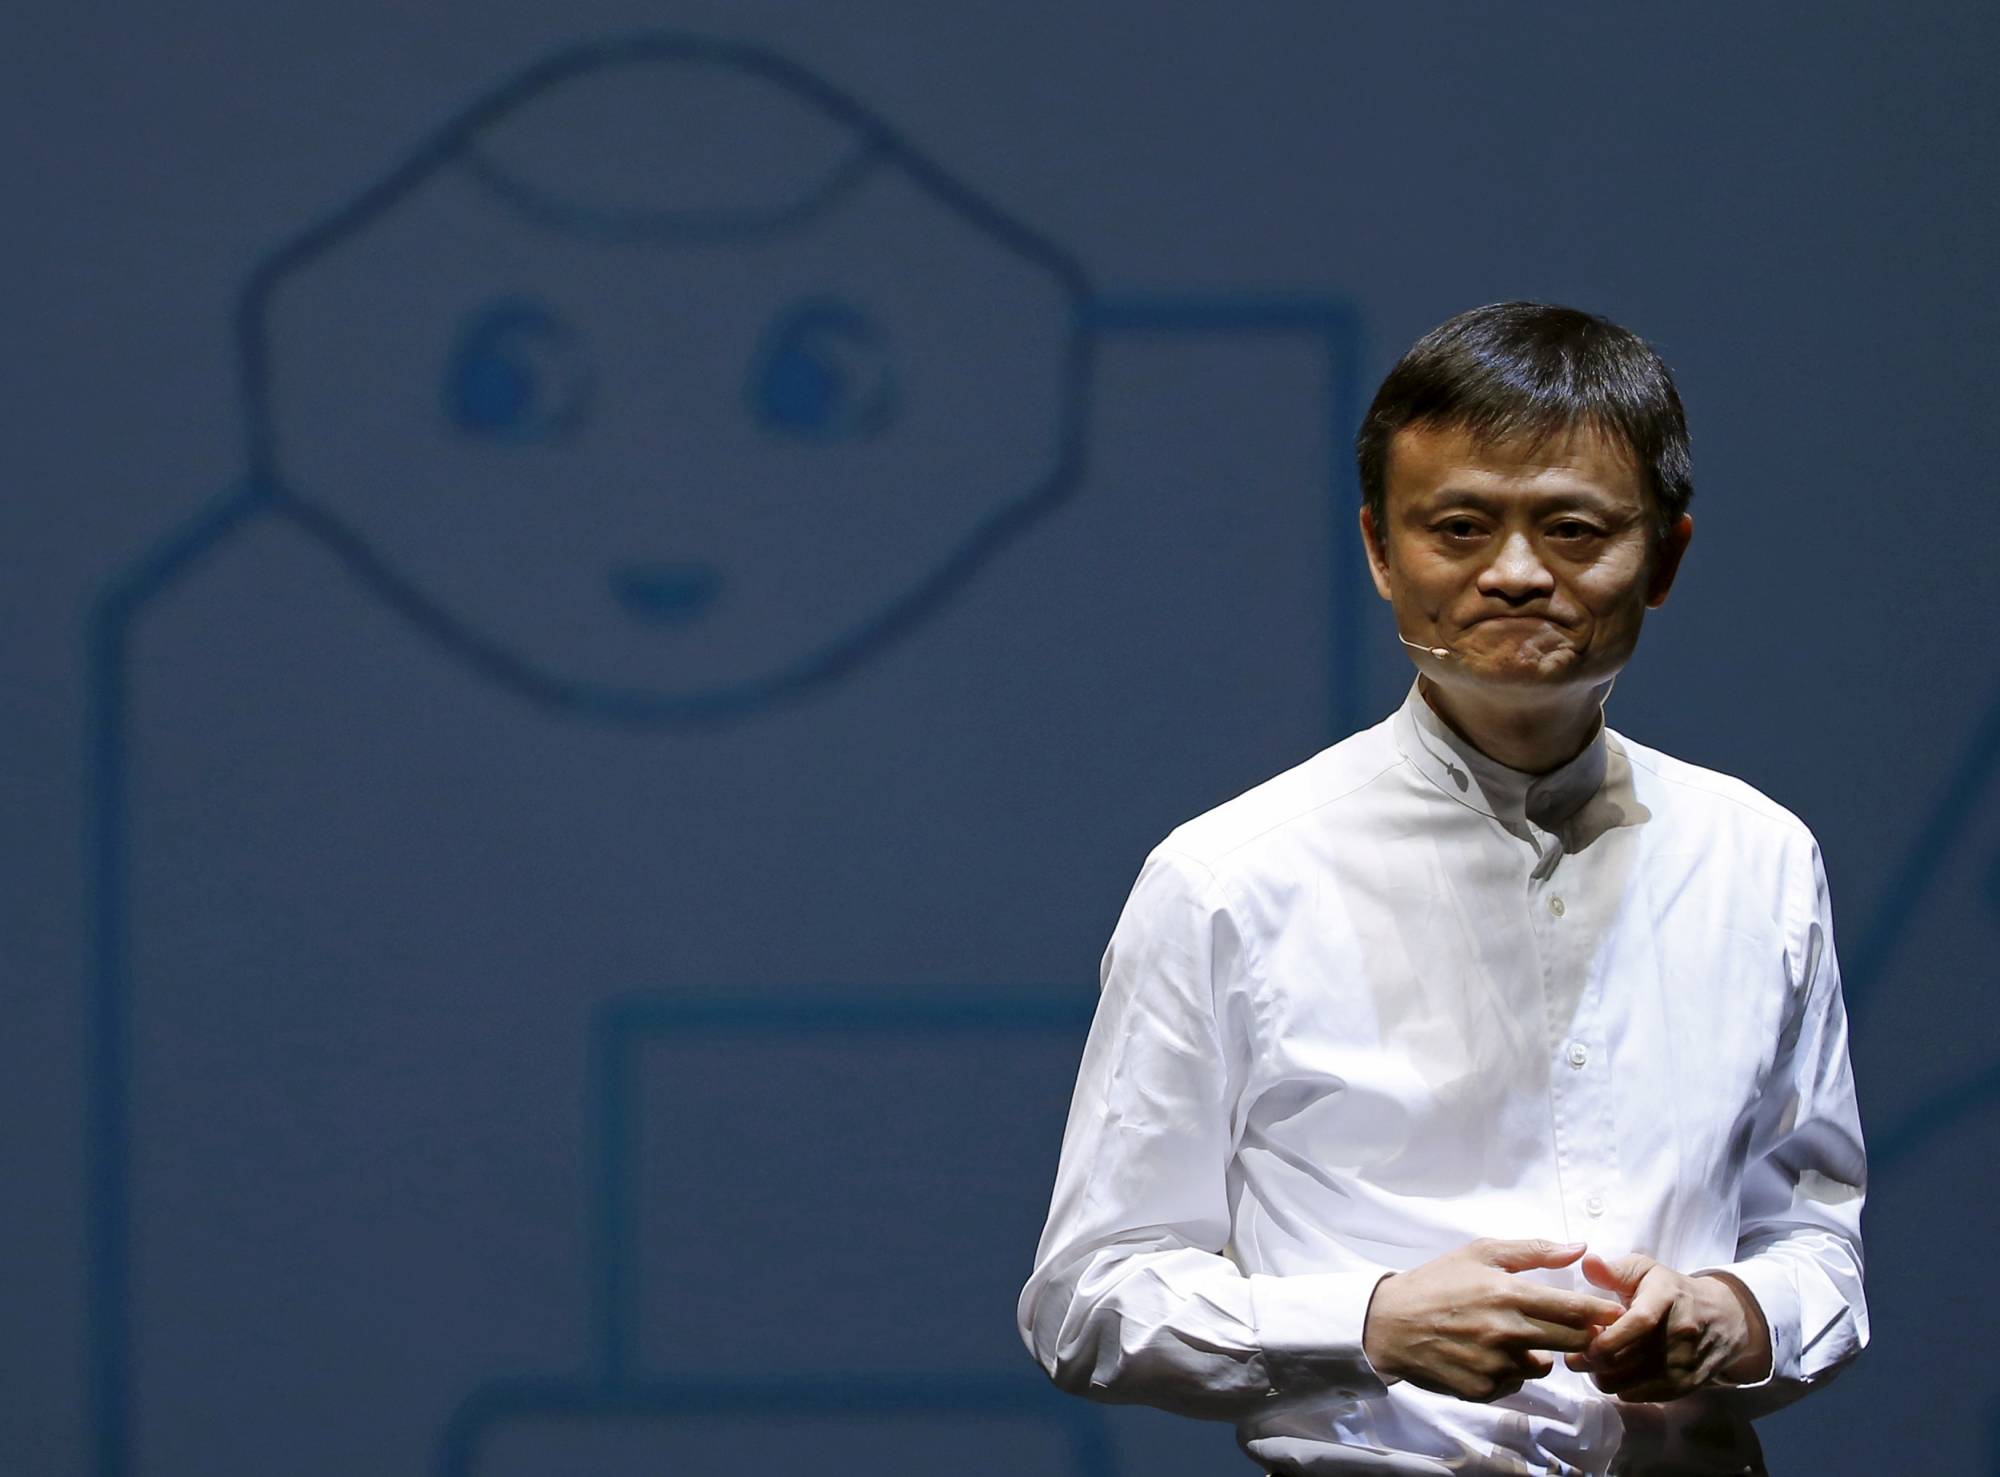 Jack Ma, founder and executive chairman of China's Alibaba Group, has criticized Beijing for what he sees as tight regulation based on an outdated system. | REUTERS